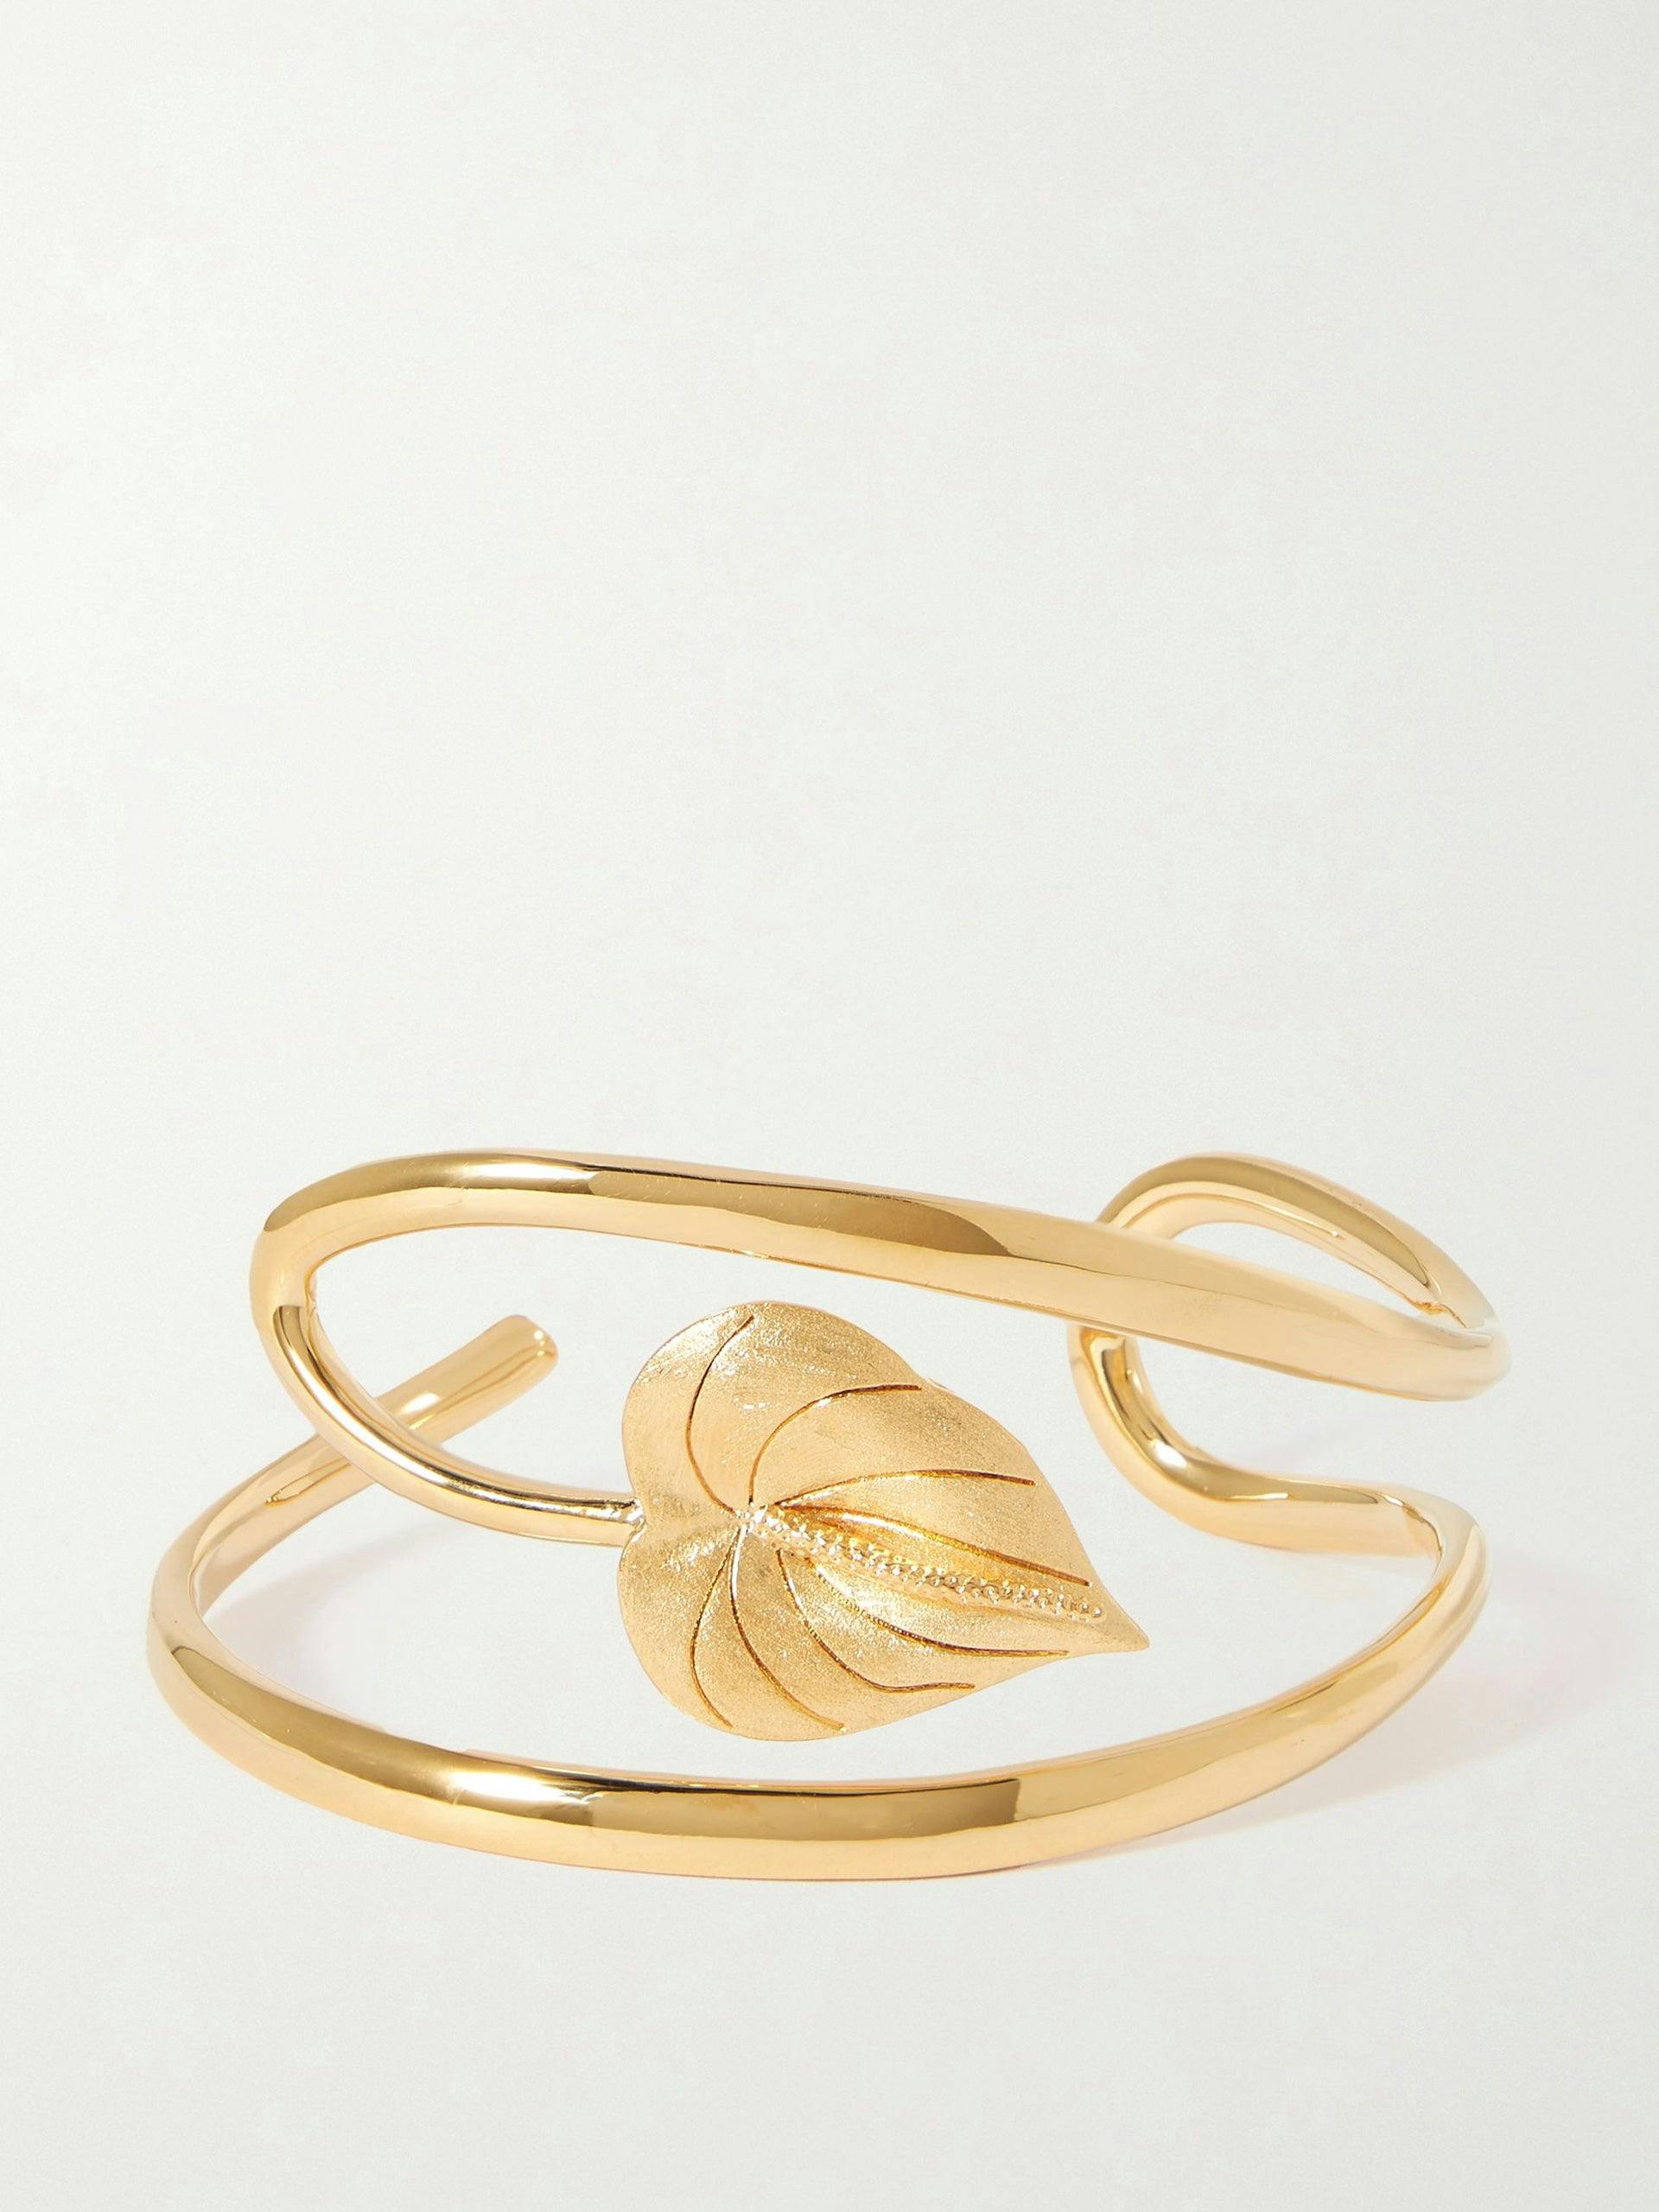 Gold-plated 'Fl-oral' bangle